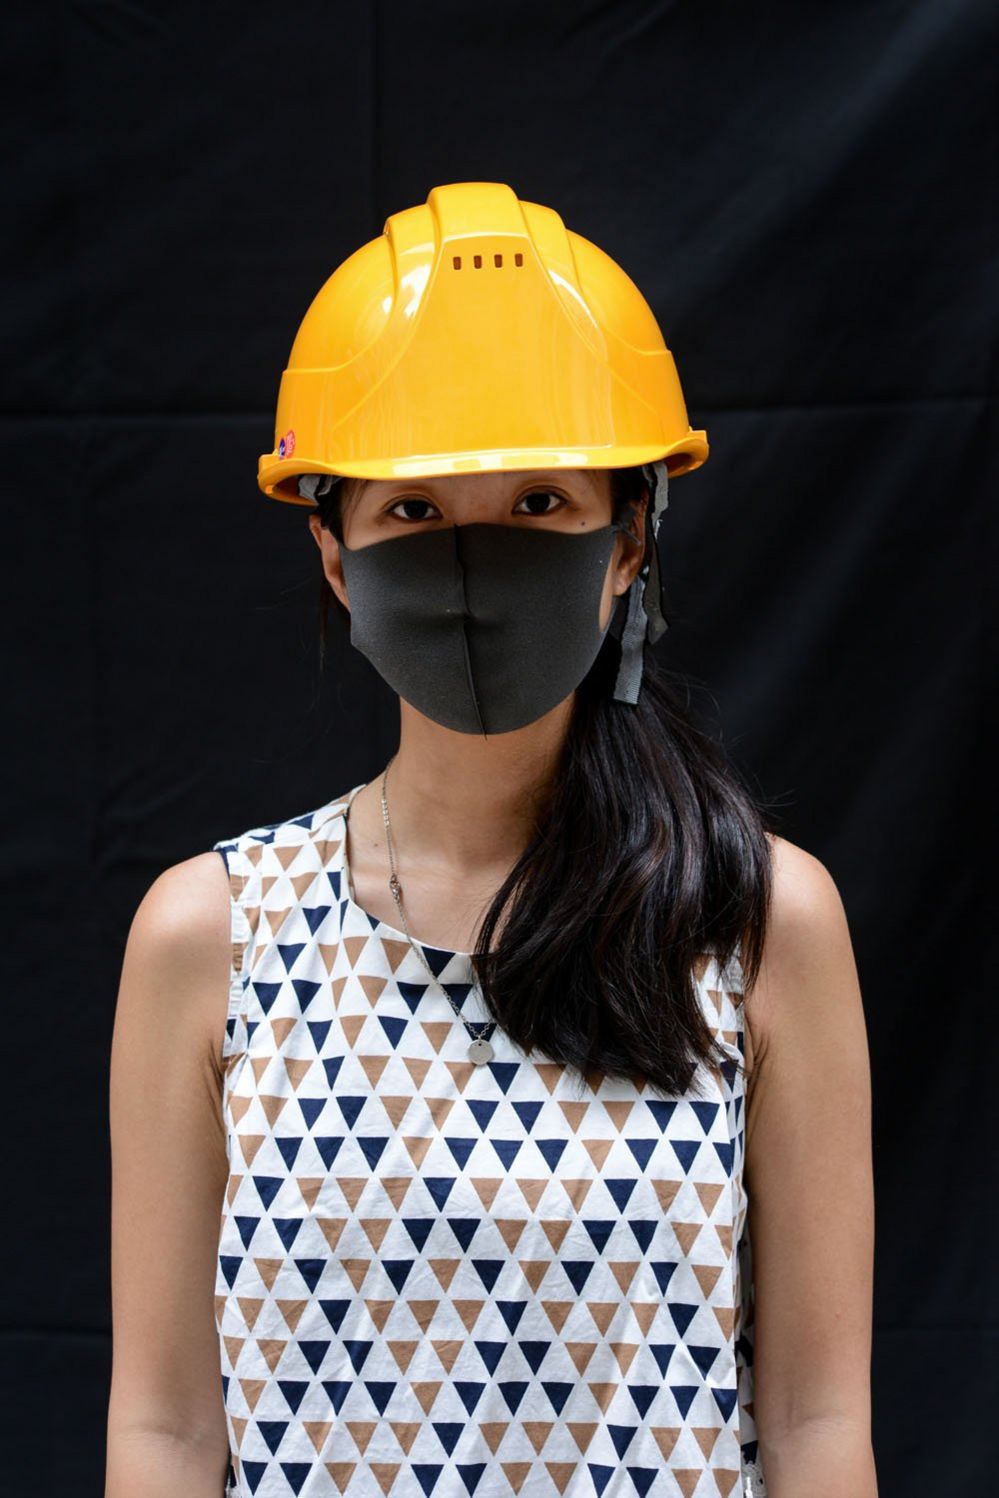 A protester poses for a portrait during the Anti-Totalitarianism march in Causeway Bay, Hong Kong, 29 September 2019